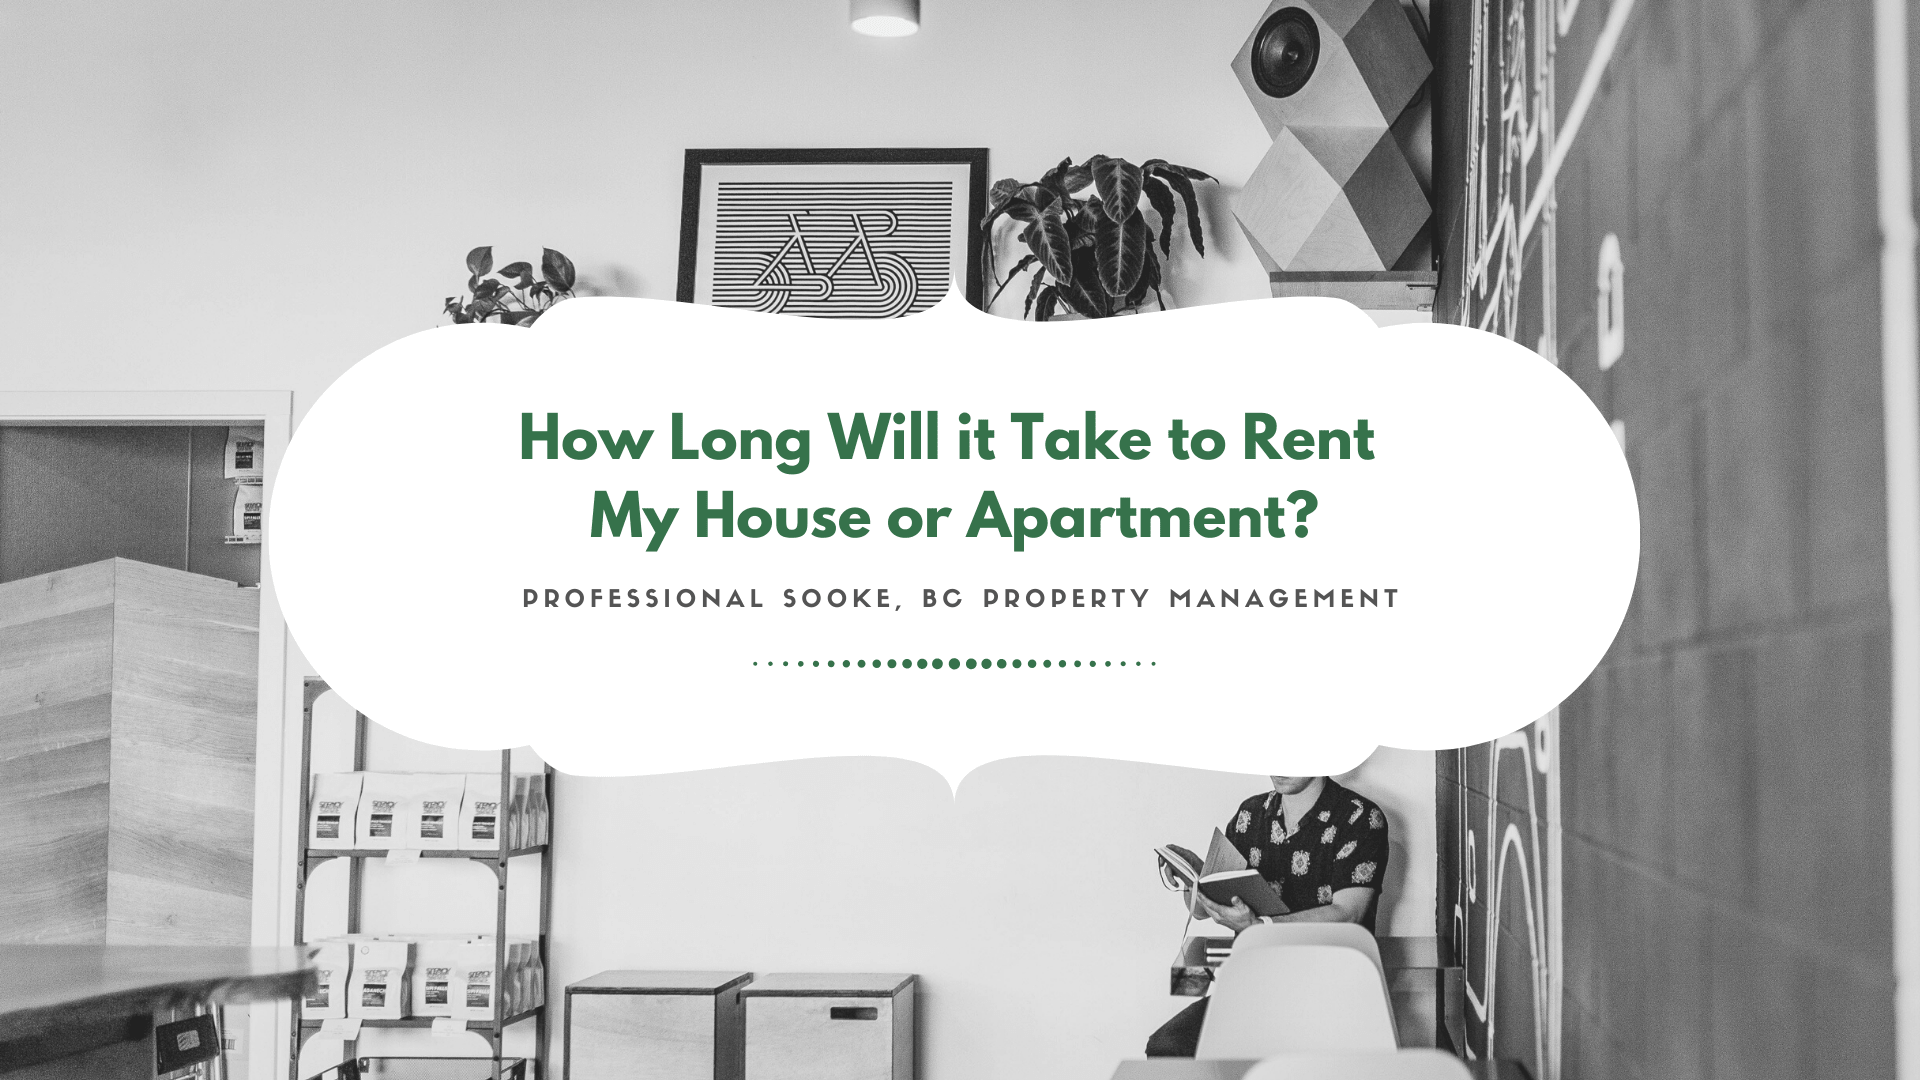 How Long Will it Take to Rent My Sooke, BC House or Apartment?